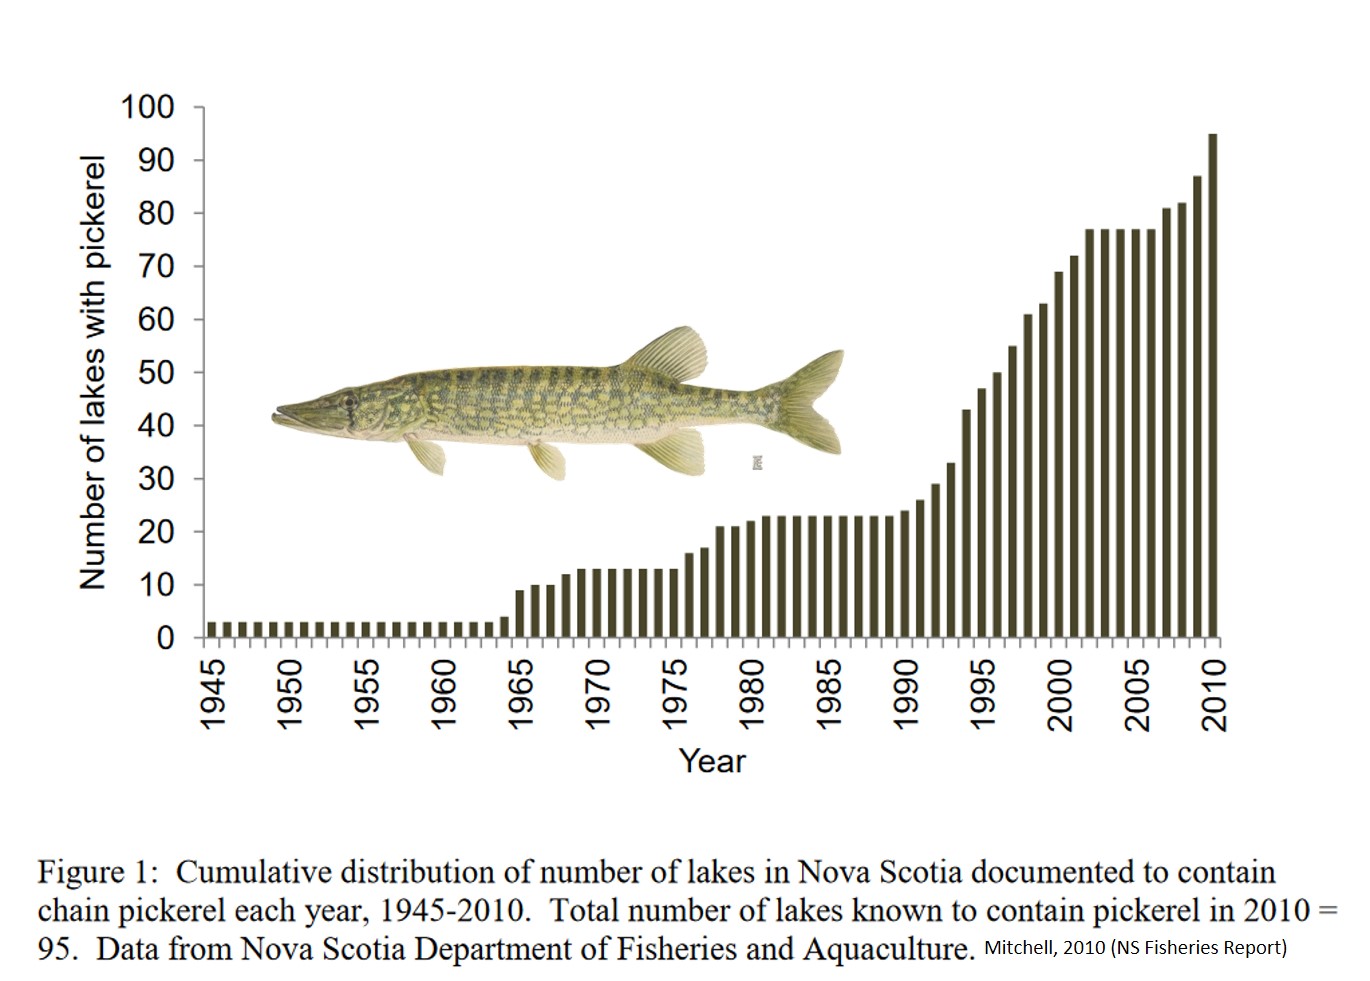 A graph from Mitchell et al (2010) showing the number of lakes with chain pickerel since 1940s, increasing to over 100 lakes in 2010.